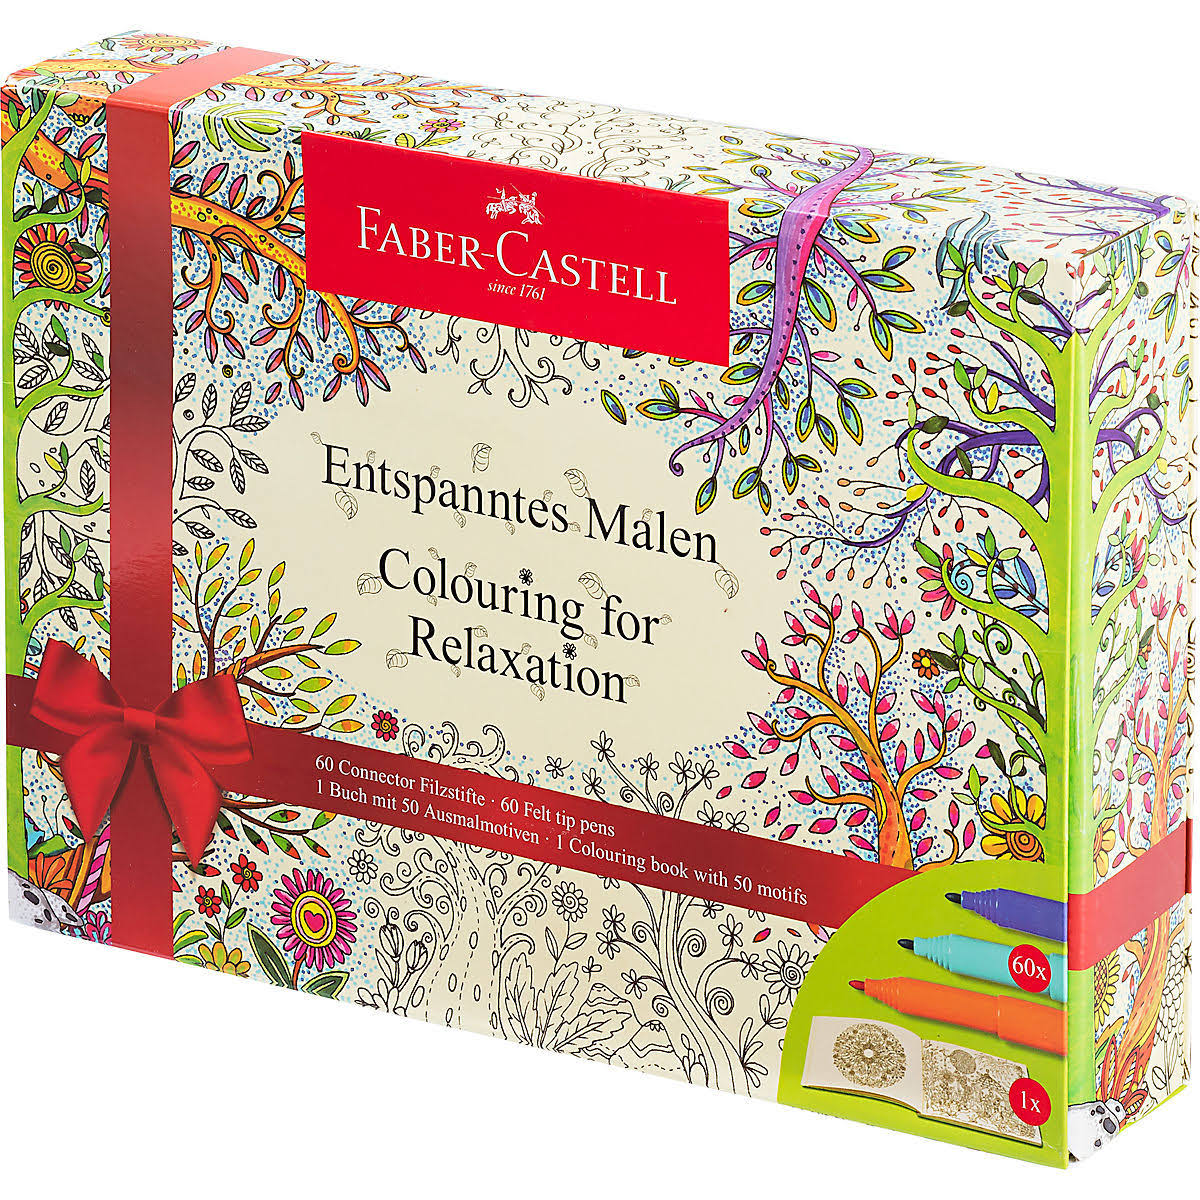 Faber-Castell Colouring for Relaxation Felt Tip Pens Set in Gift Box.